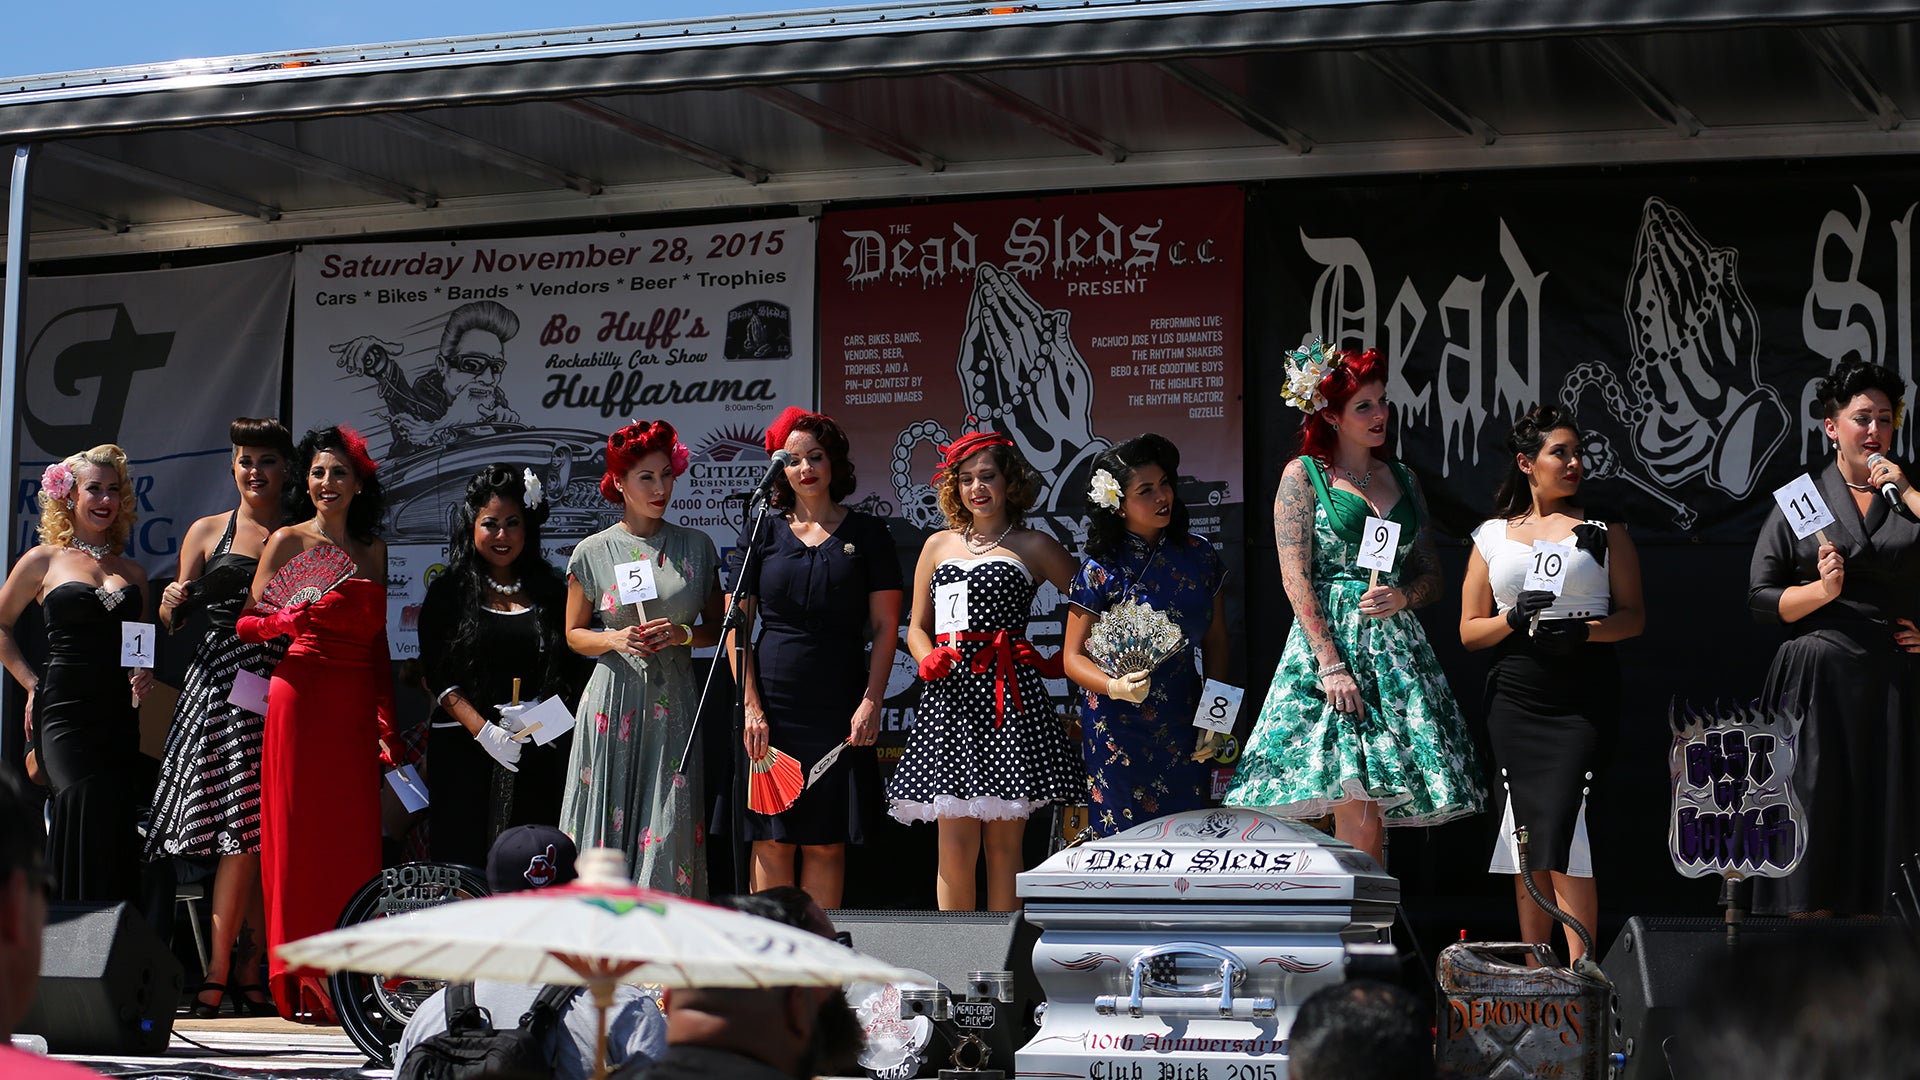 Pin Up Girl Contestants Dead Sleds Car Show Anniversary